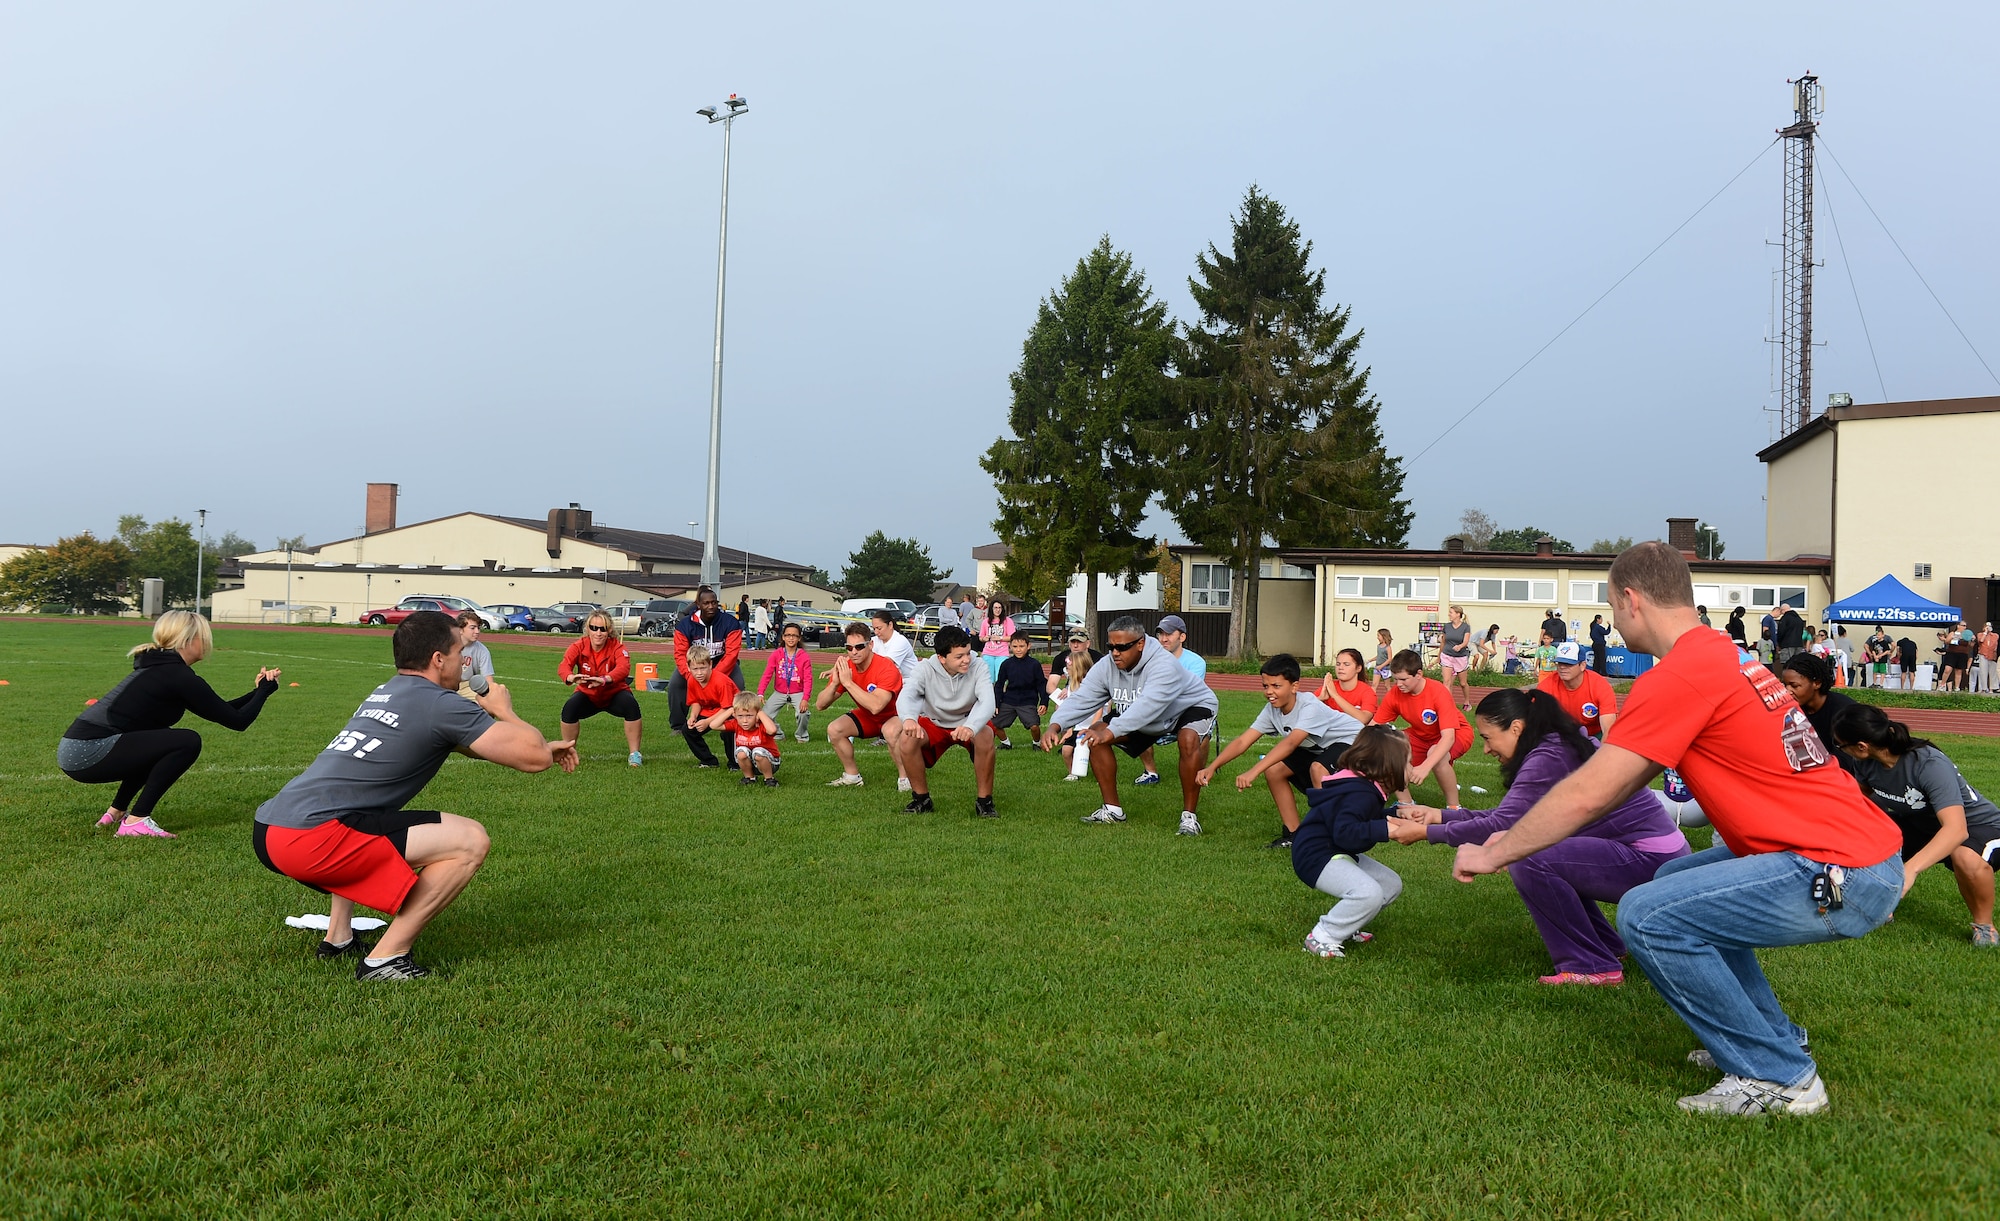 Families gather together to stretch out before the start of Fit Family Field Day at the outdoor track and field on Spangdahlem Air Base, Germany, Sept. 20, 2014. The event lasted two hours and provided families with nutrition and health information in addition to the workouts they performed. (U.S. Air Force photo by Airman 1st Class Luke J. Kitterman/Released)